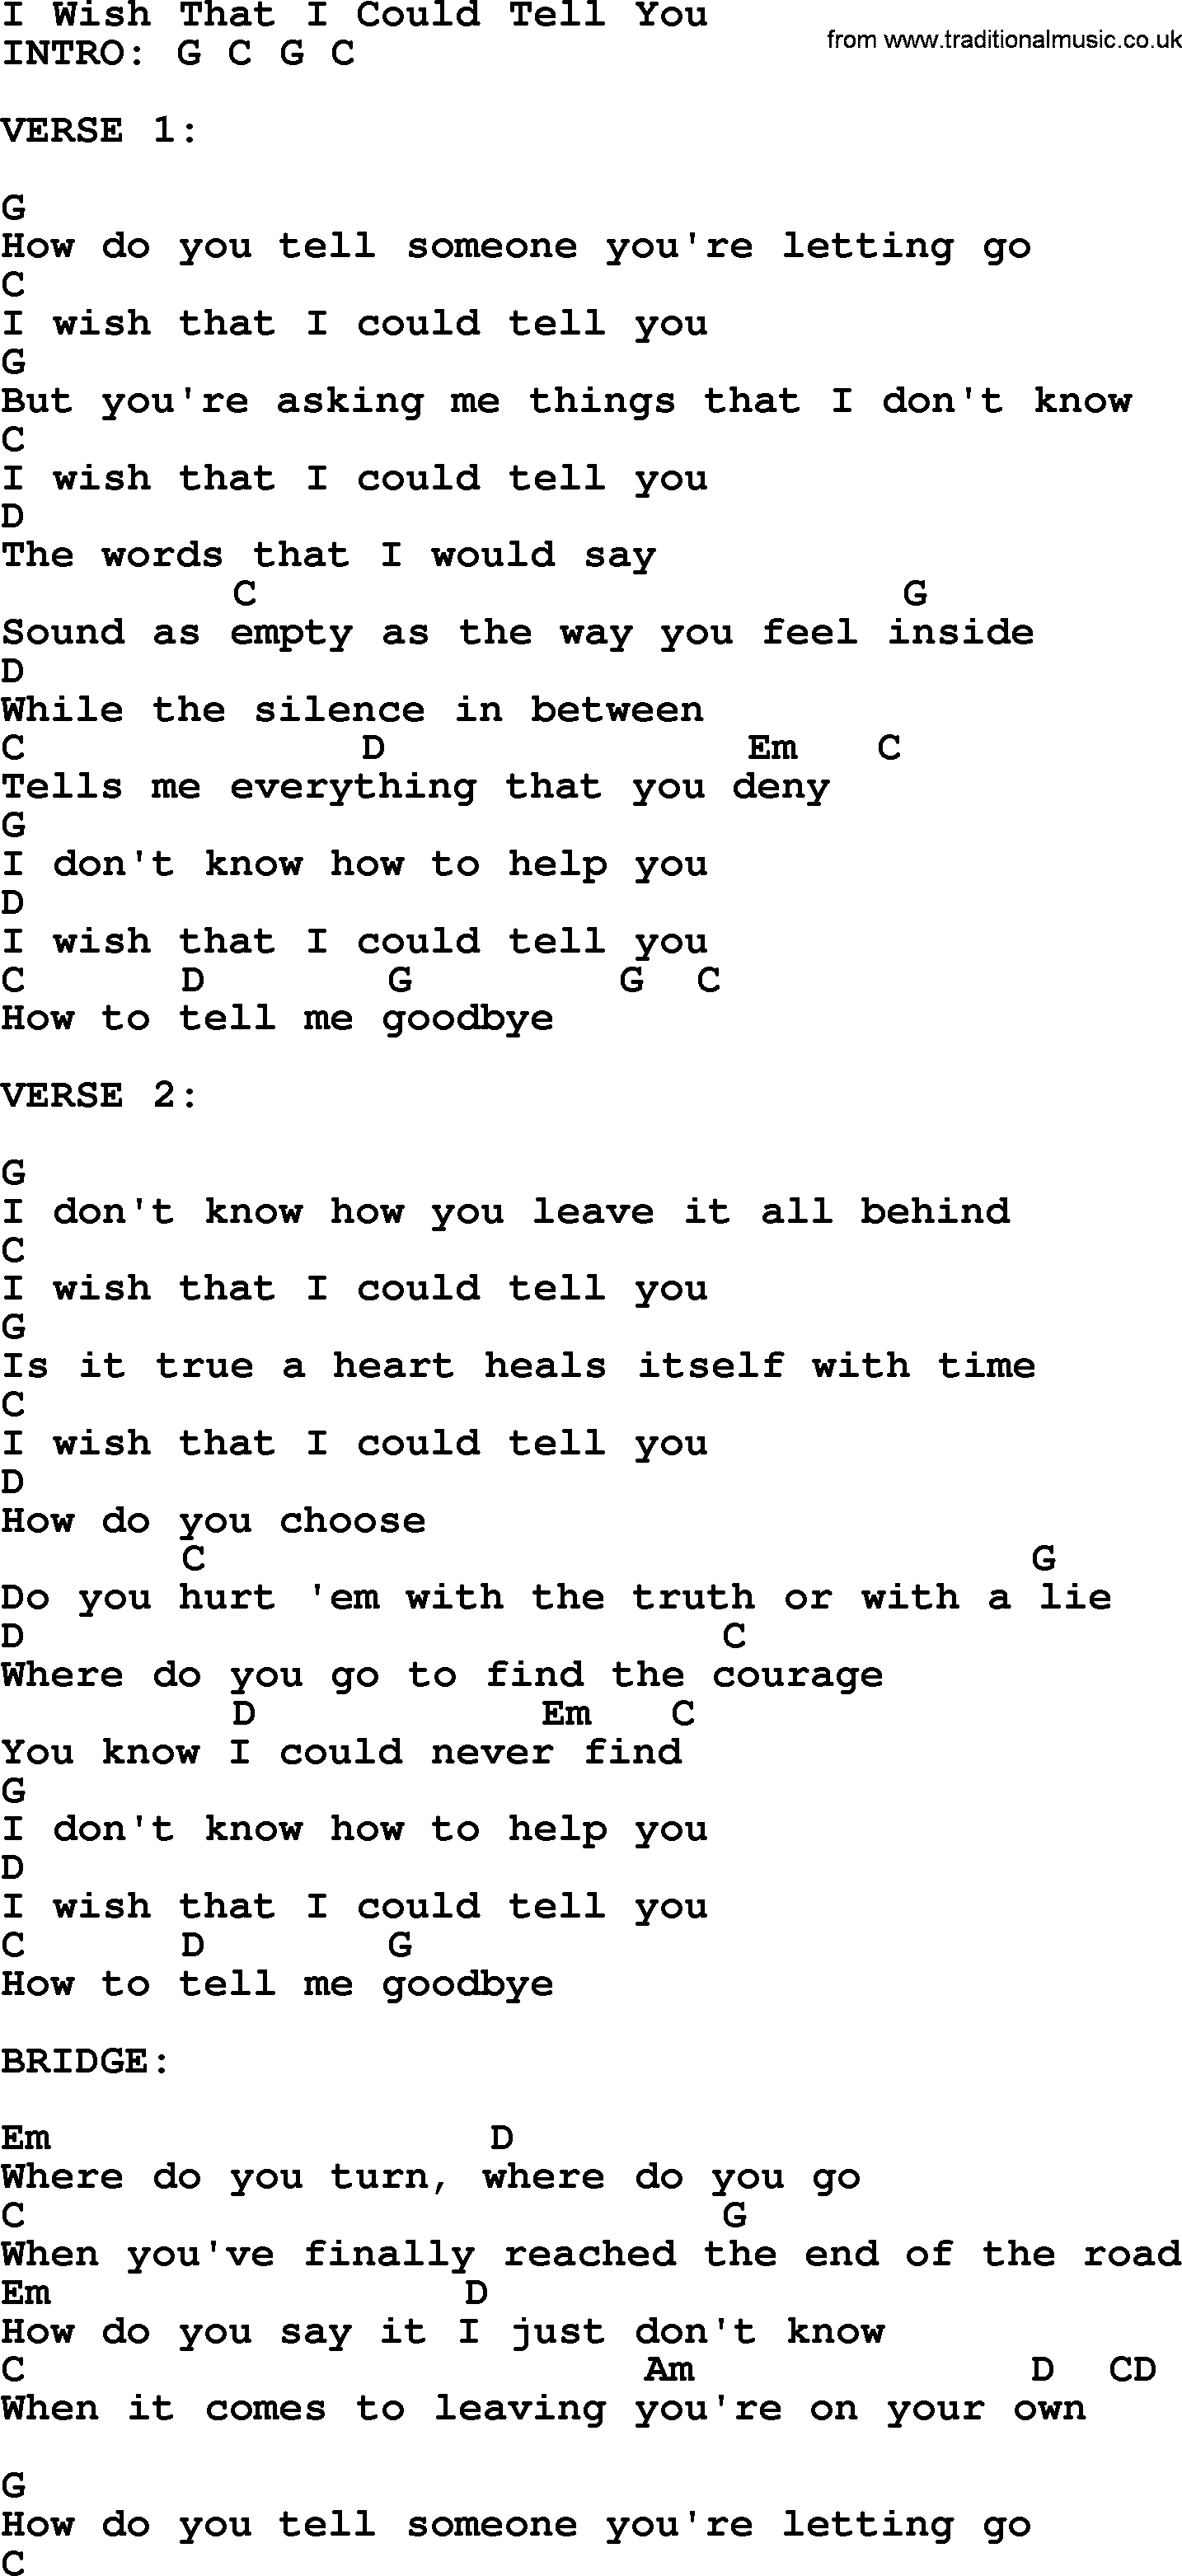 Reba McEntire song: I Wish That I Could Tell You, lyrics and chords